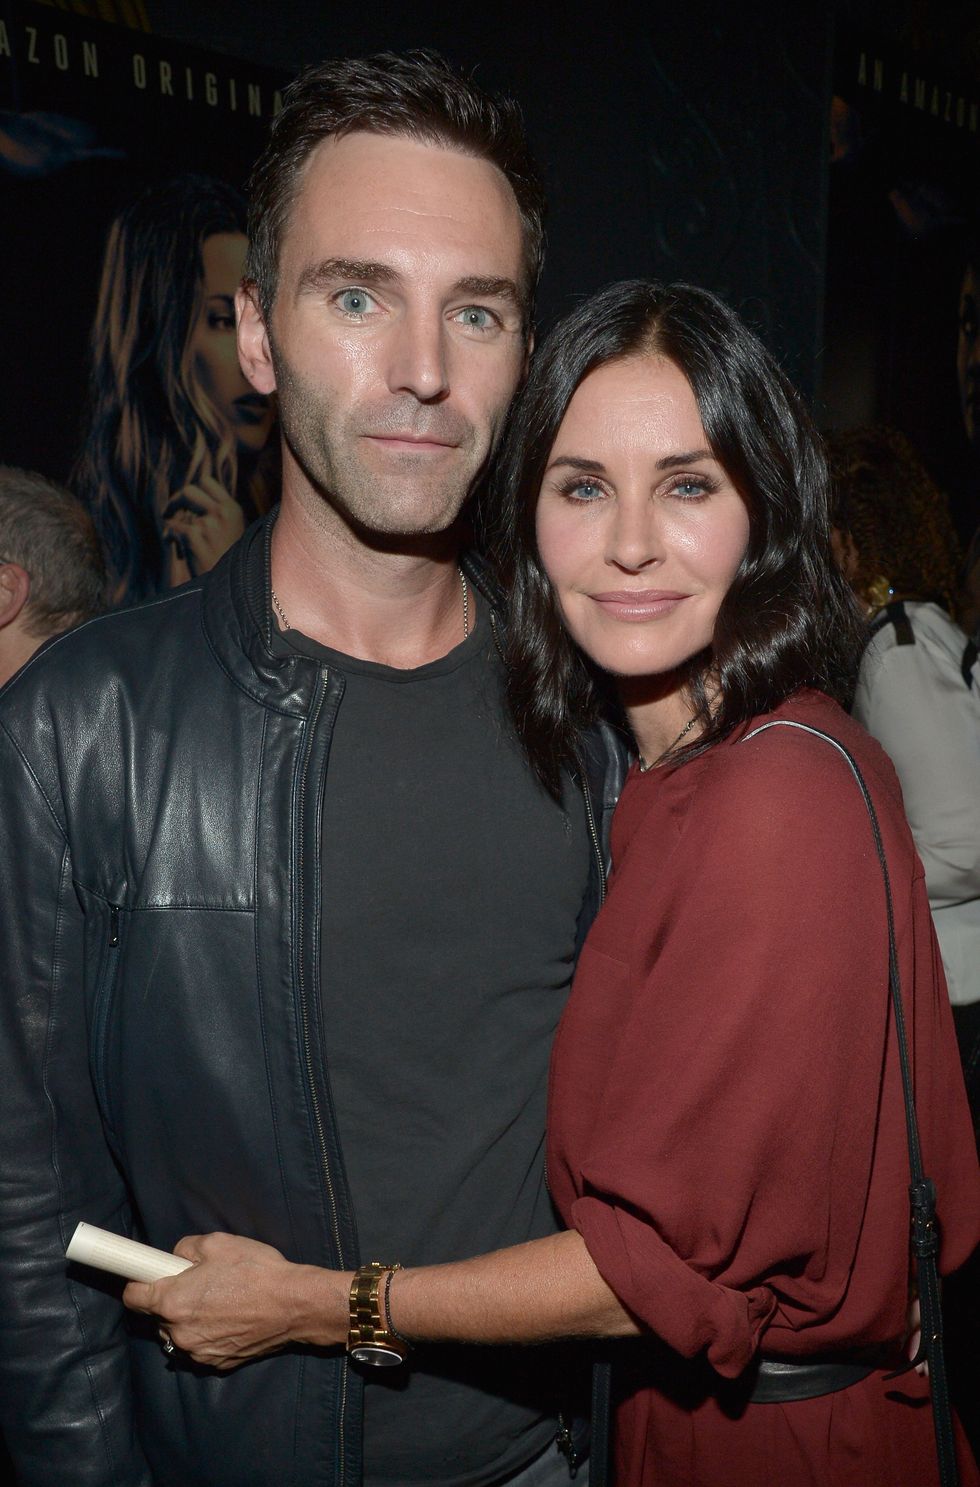 Courtney Cox had her facial fillers dissolved